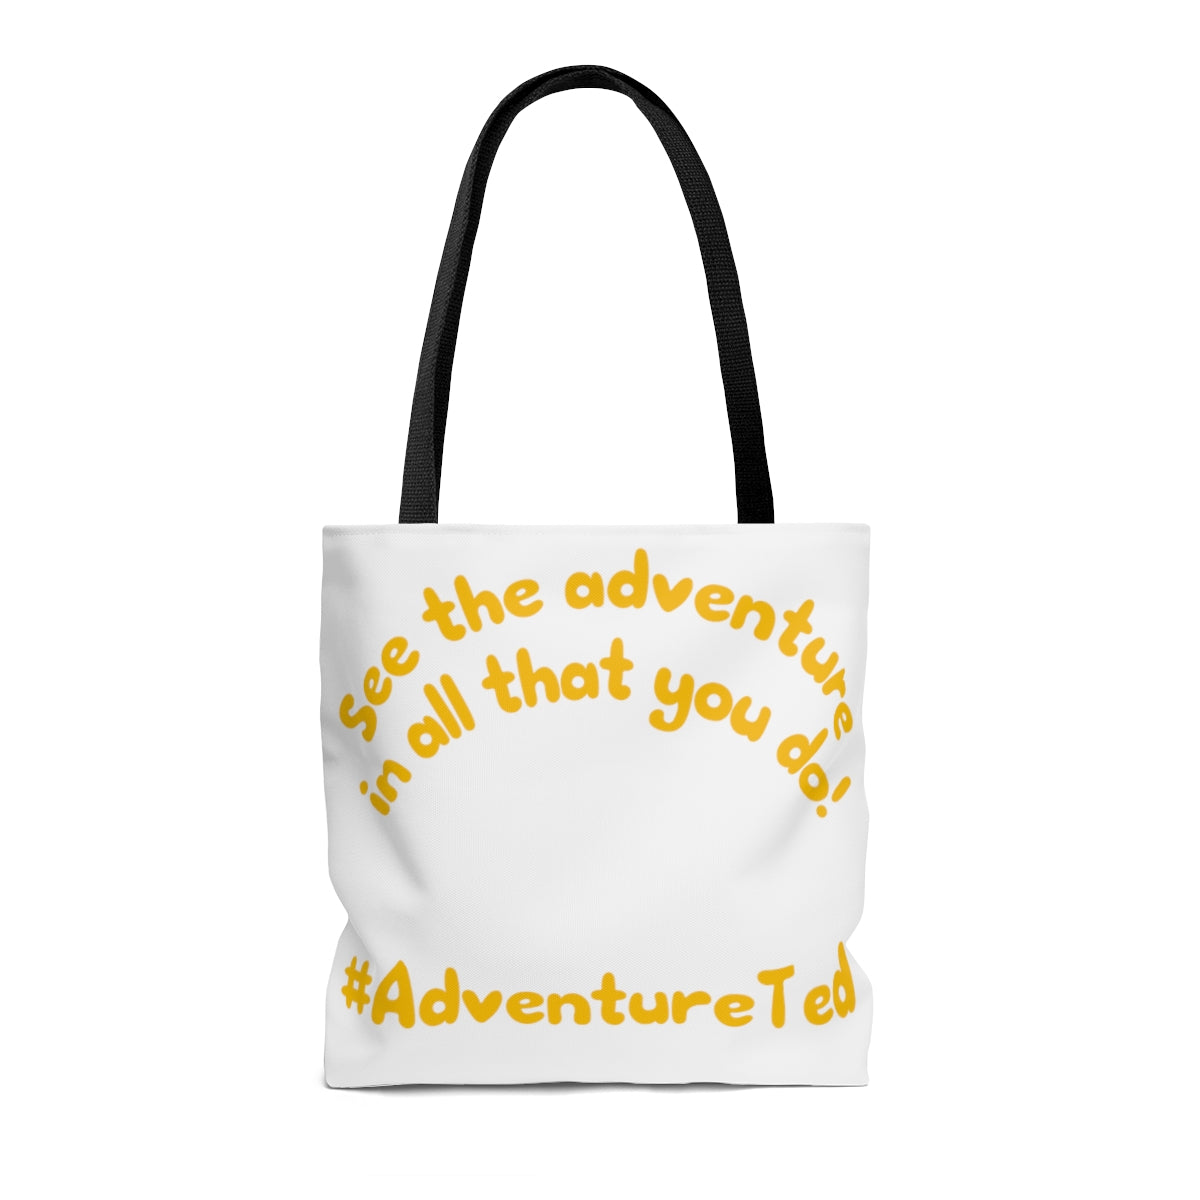 Adventure Ted Canvas Bag - White